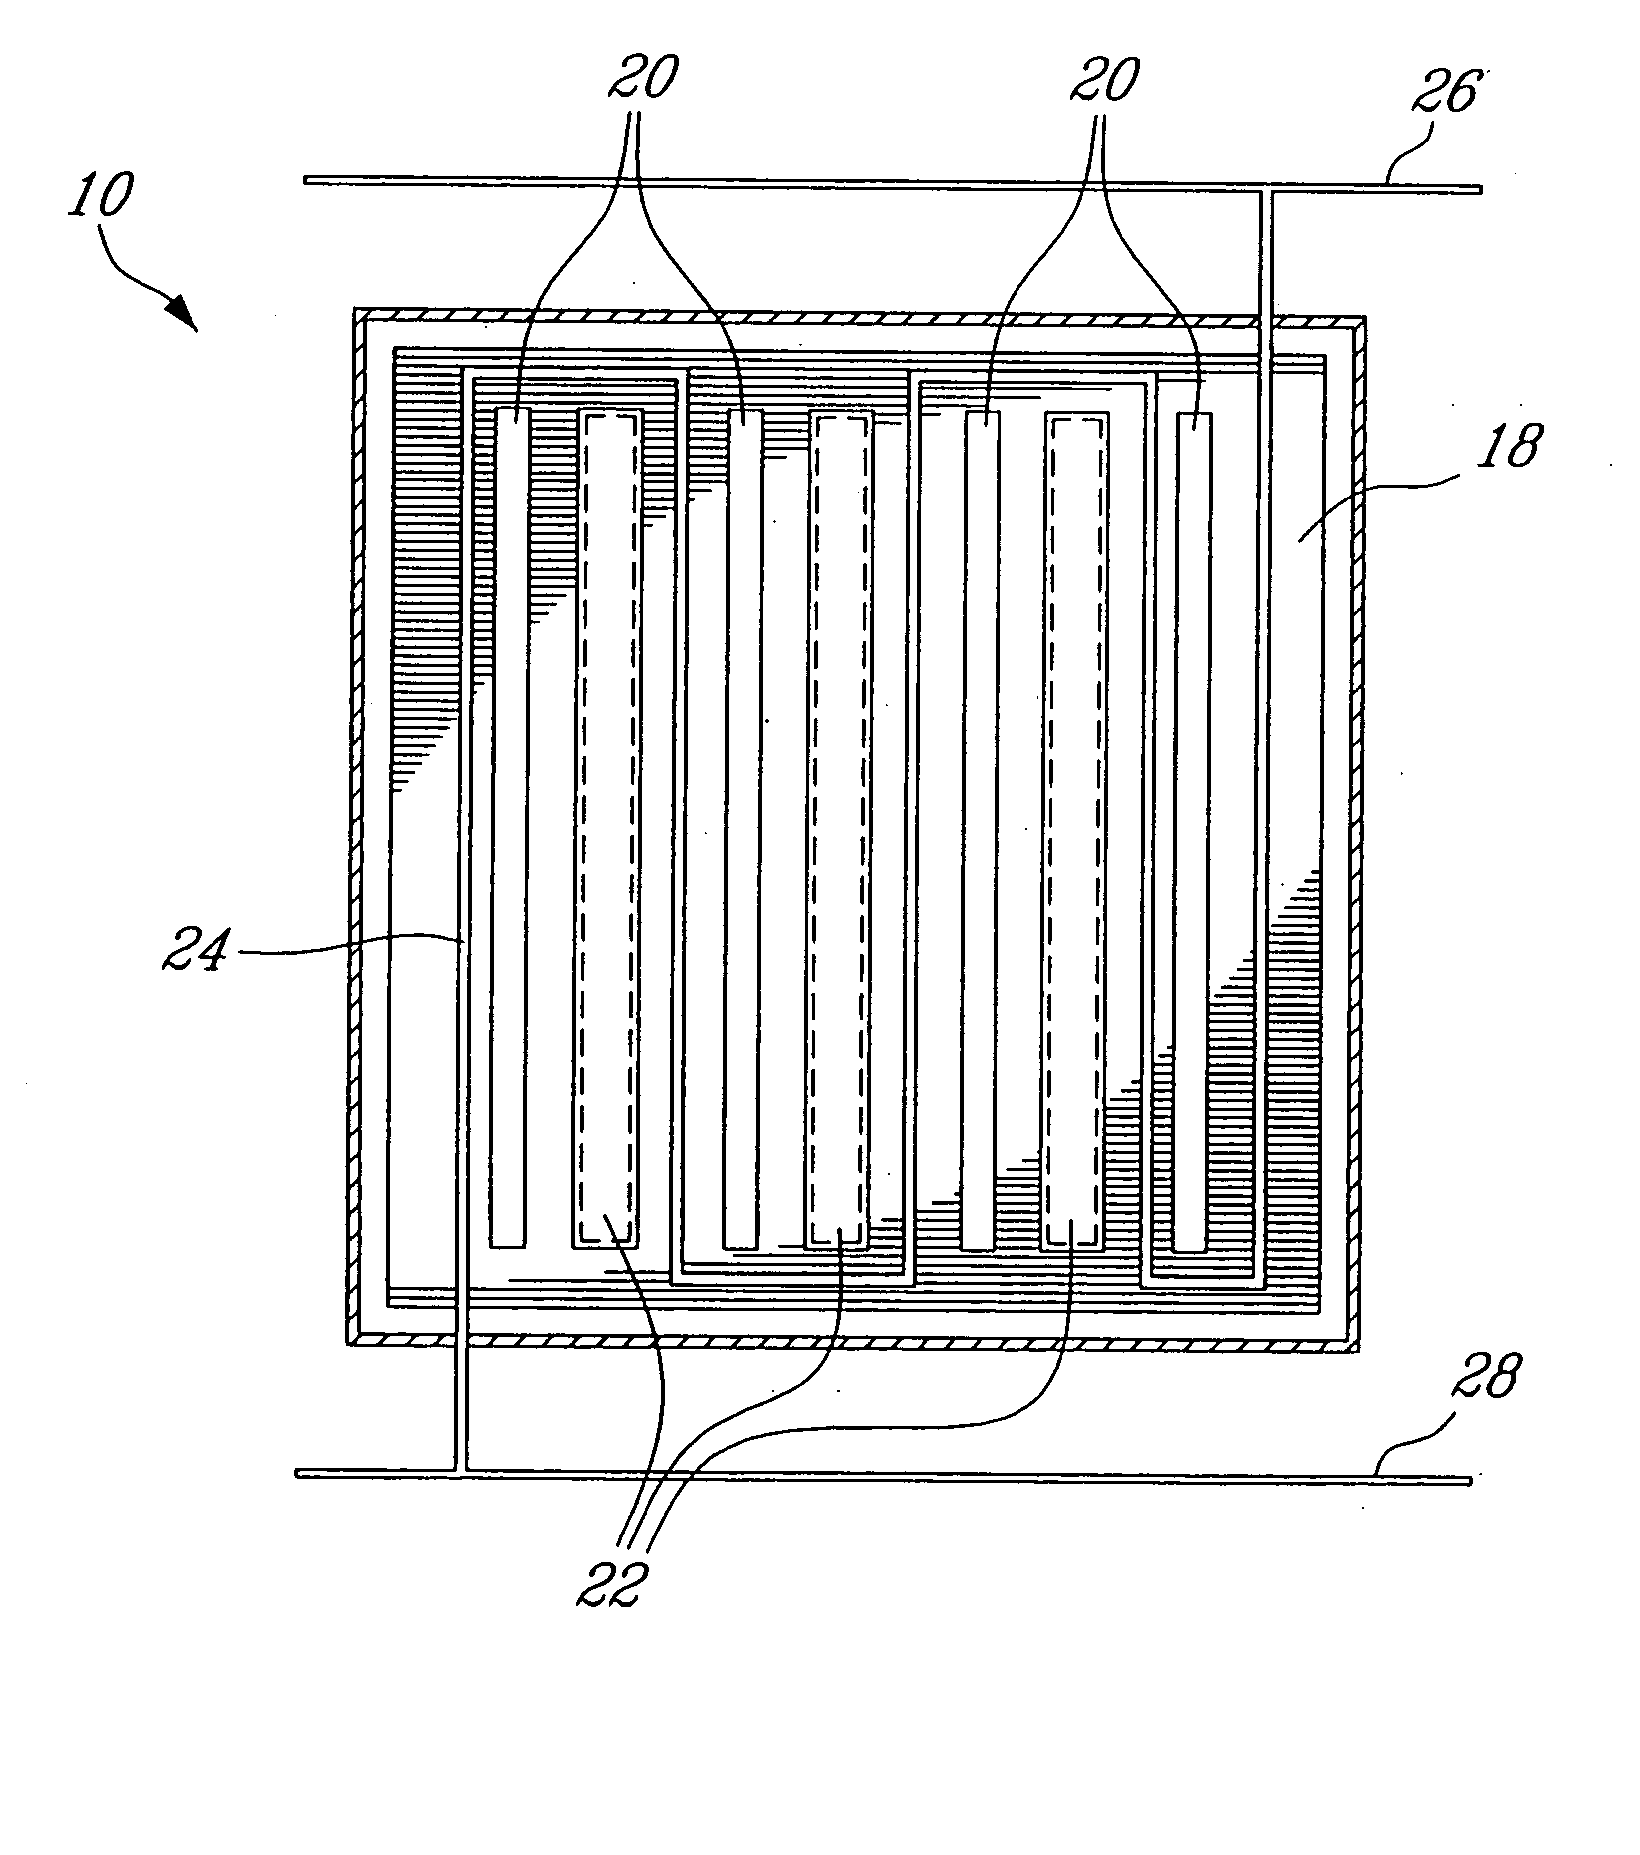 Surface heating system